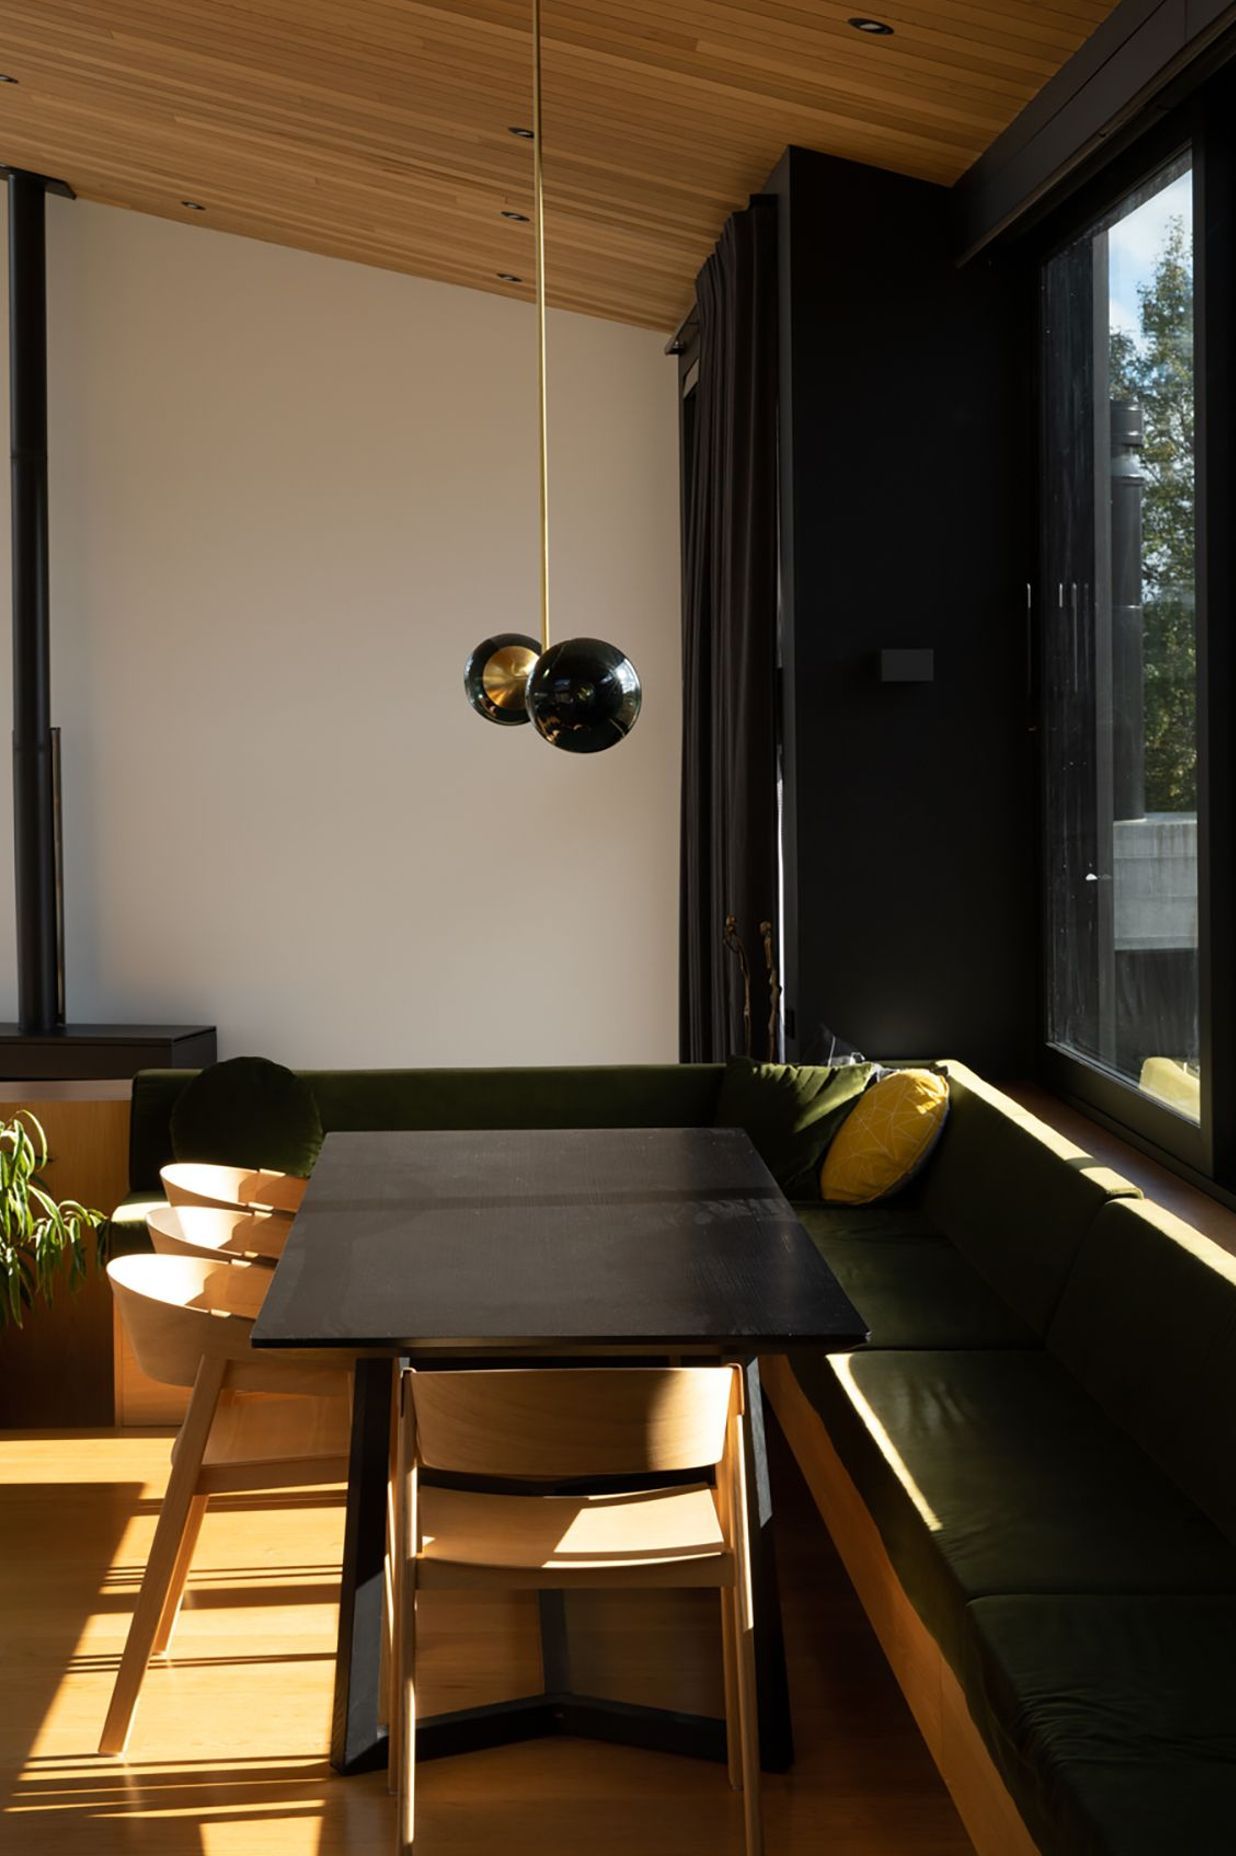 The dining area has cosy built-in seating that forms an 'L' around the edge of the space.